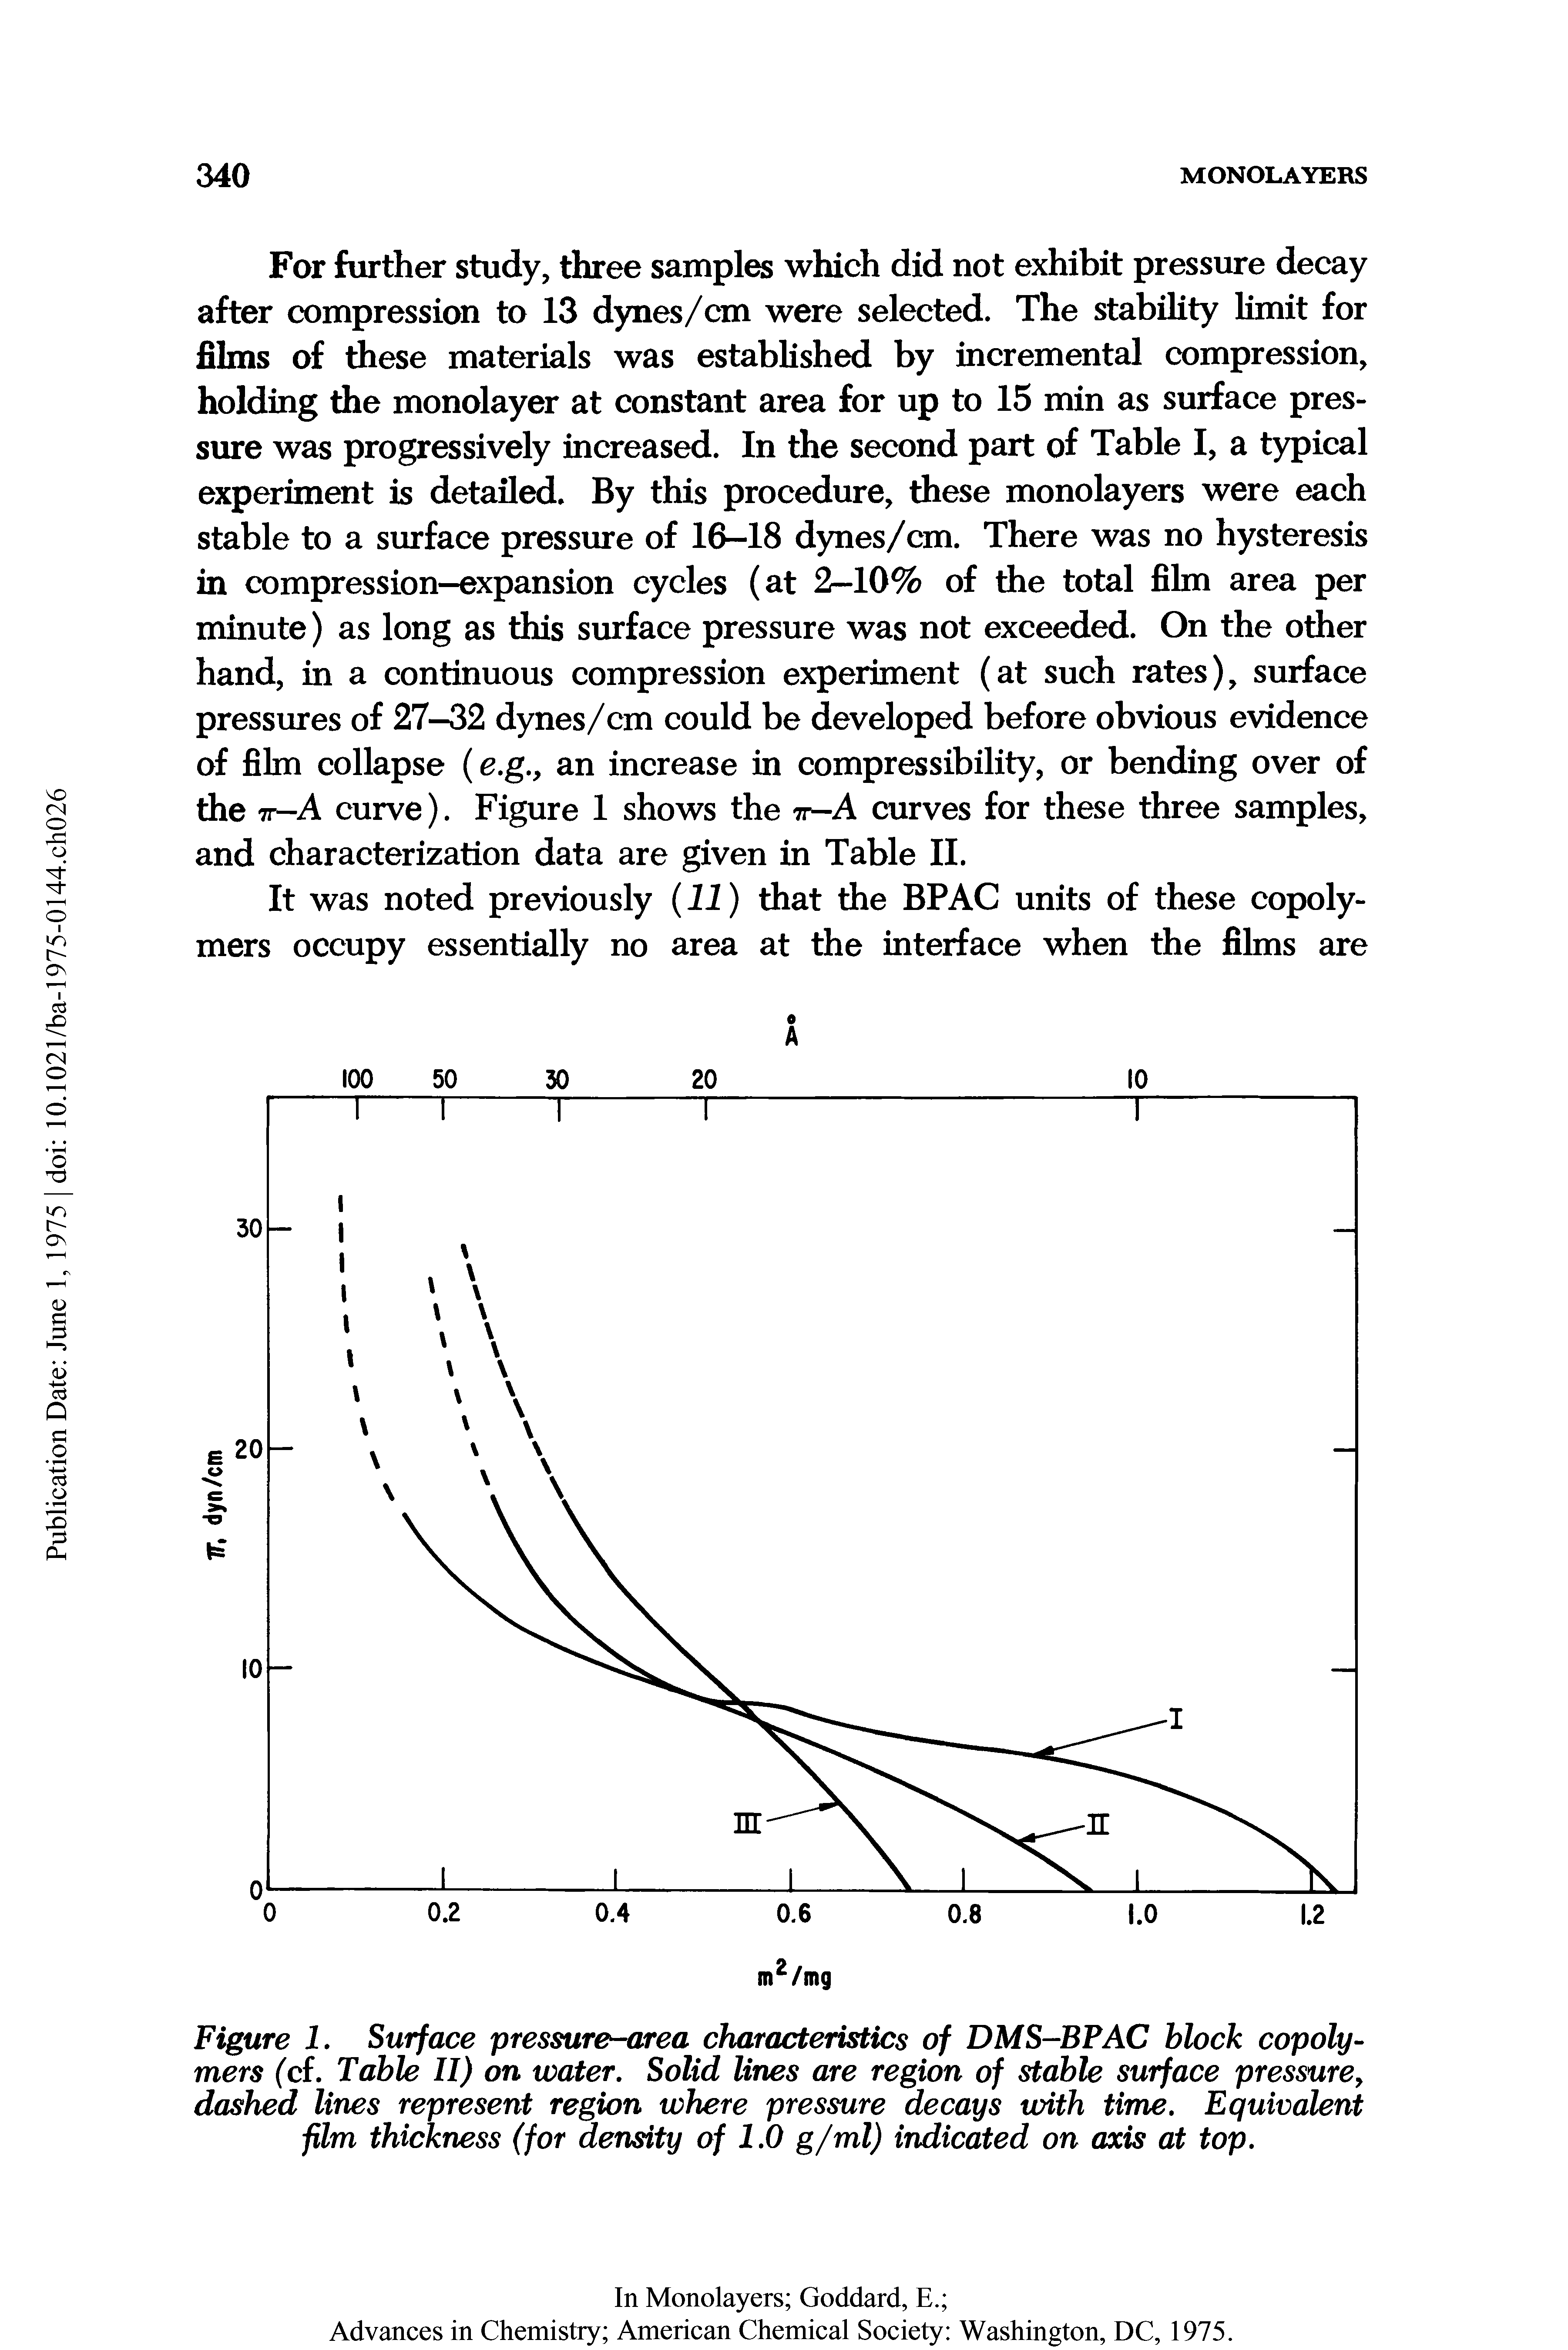 Figure 1. Surface pressure-area characteristics of DMS-BPAC block copolymers (cf. Table II) on water. Solid lines are region of stable surface pressure, dashed lines represent region where pressure decays with time. Equivalent film thickness (for density of 1.0 g/ml) indicated on axis at top.